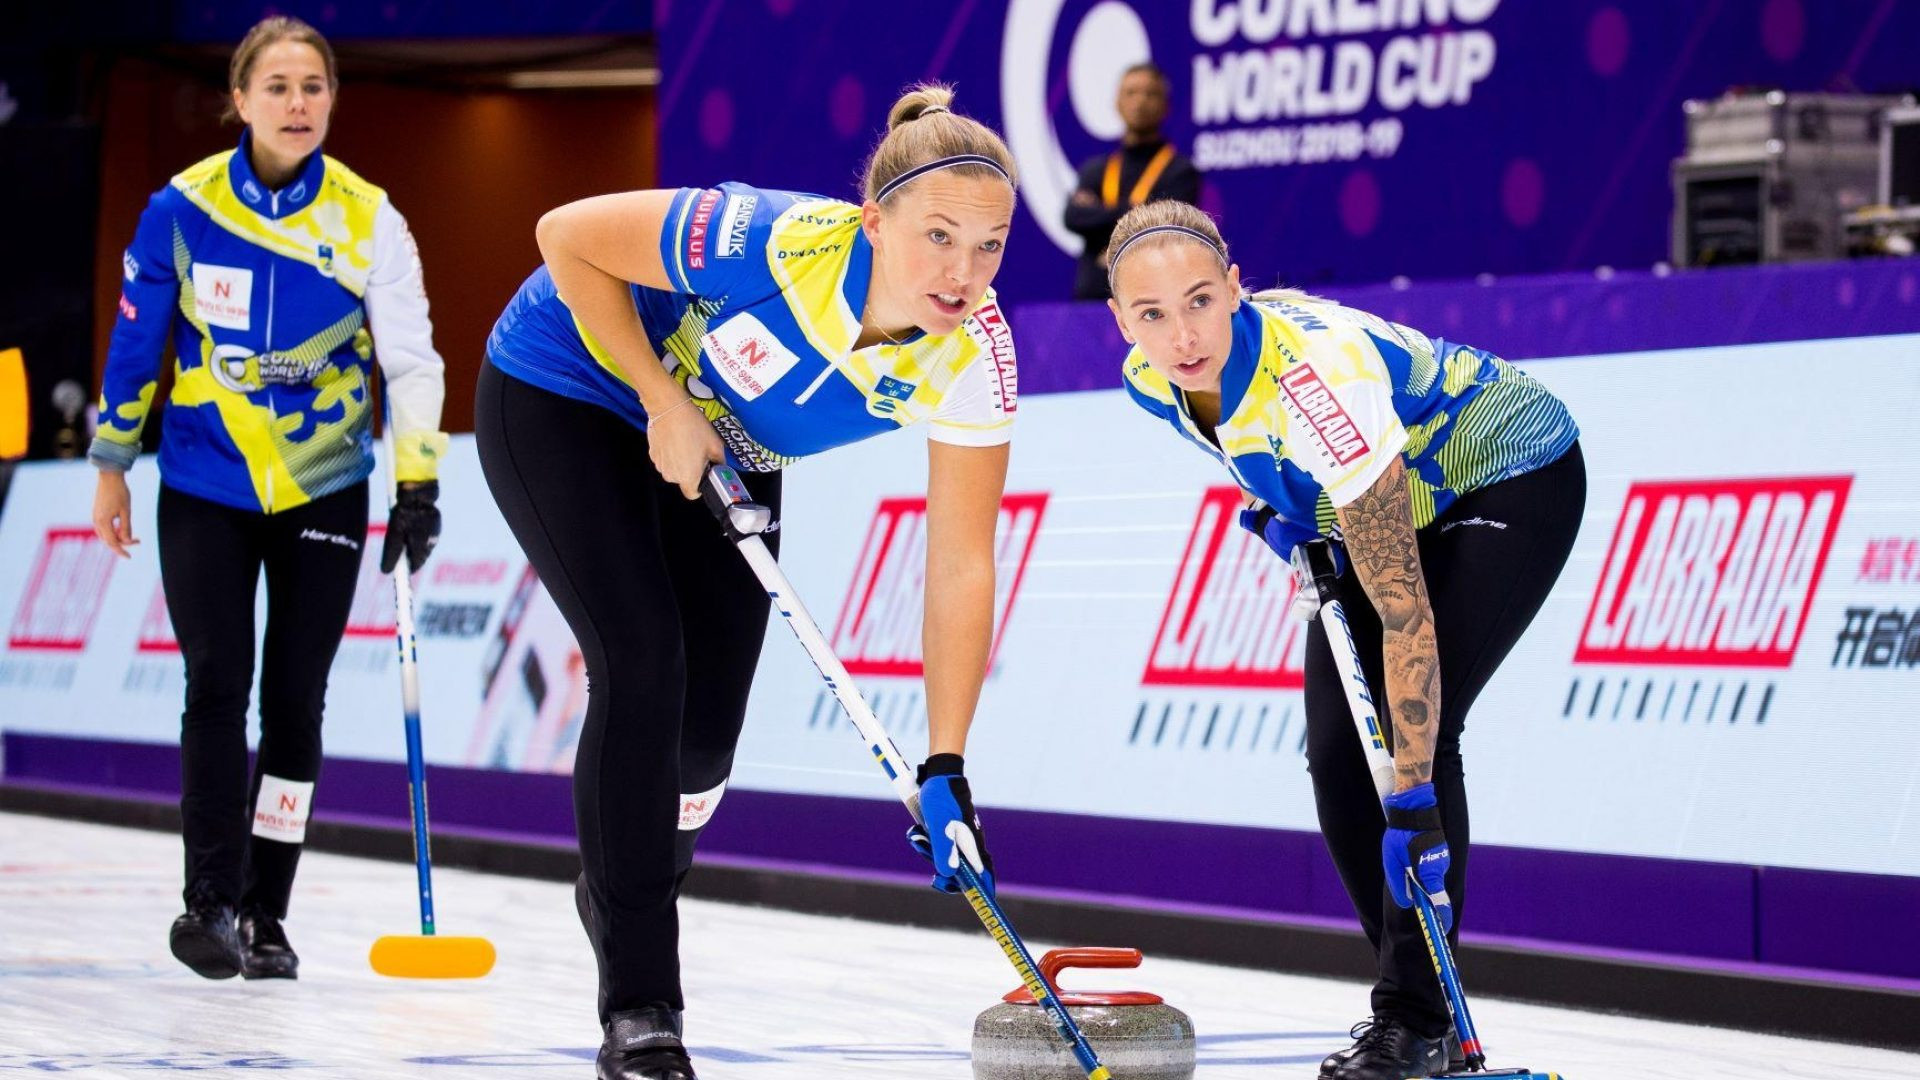 Olympic champion Hasselborg begins new Curling World Cup series with victory